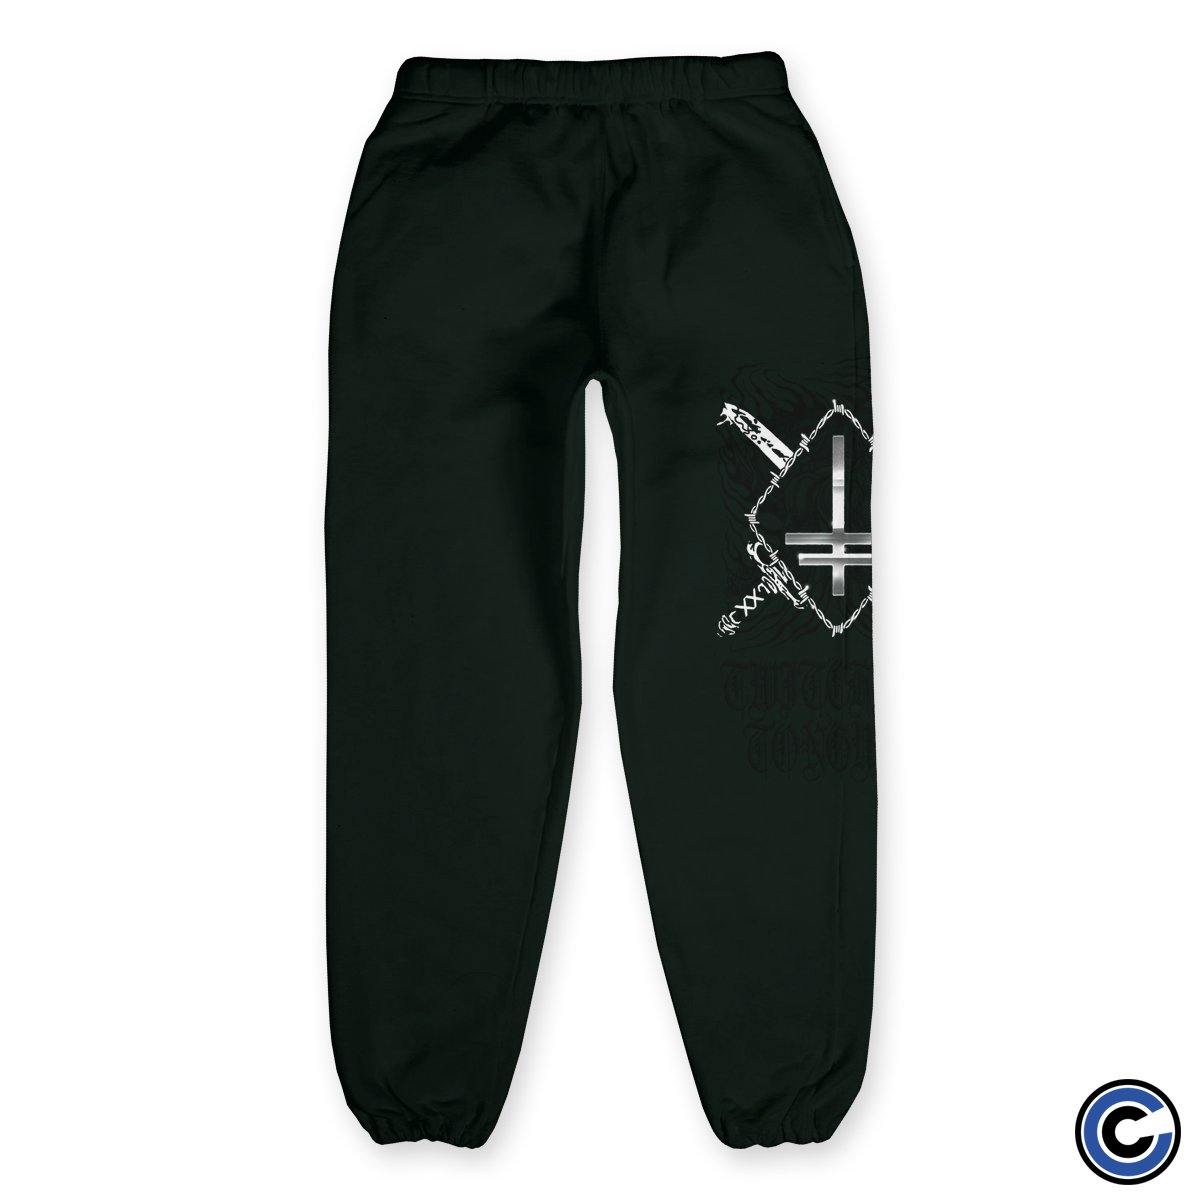 Buy – Twitching Tongues "Double Devil" Sweatpants – Band & Music Merch – Cold Cuts Merch